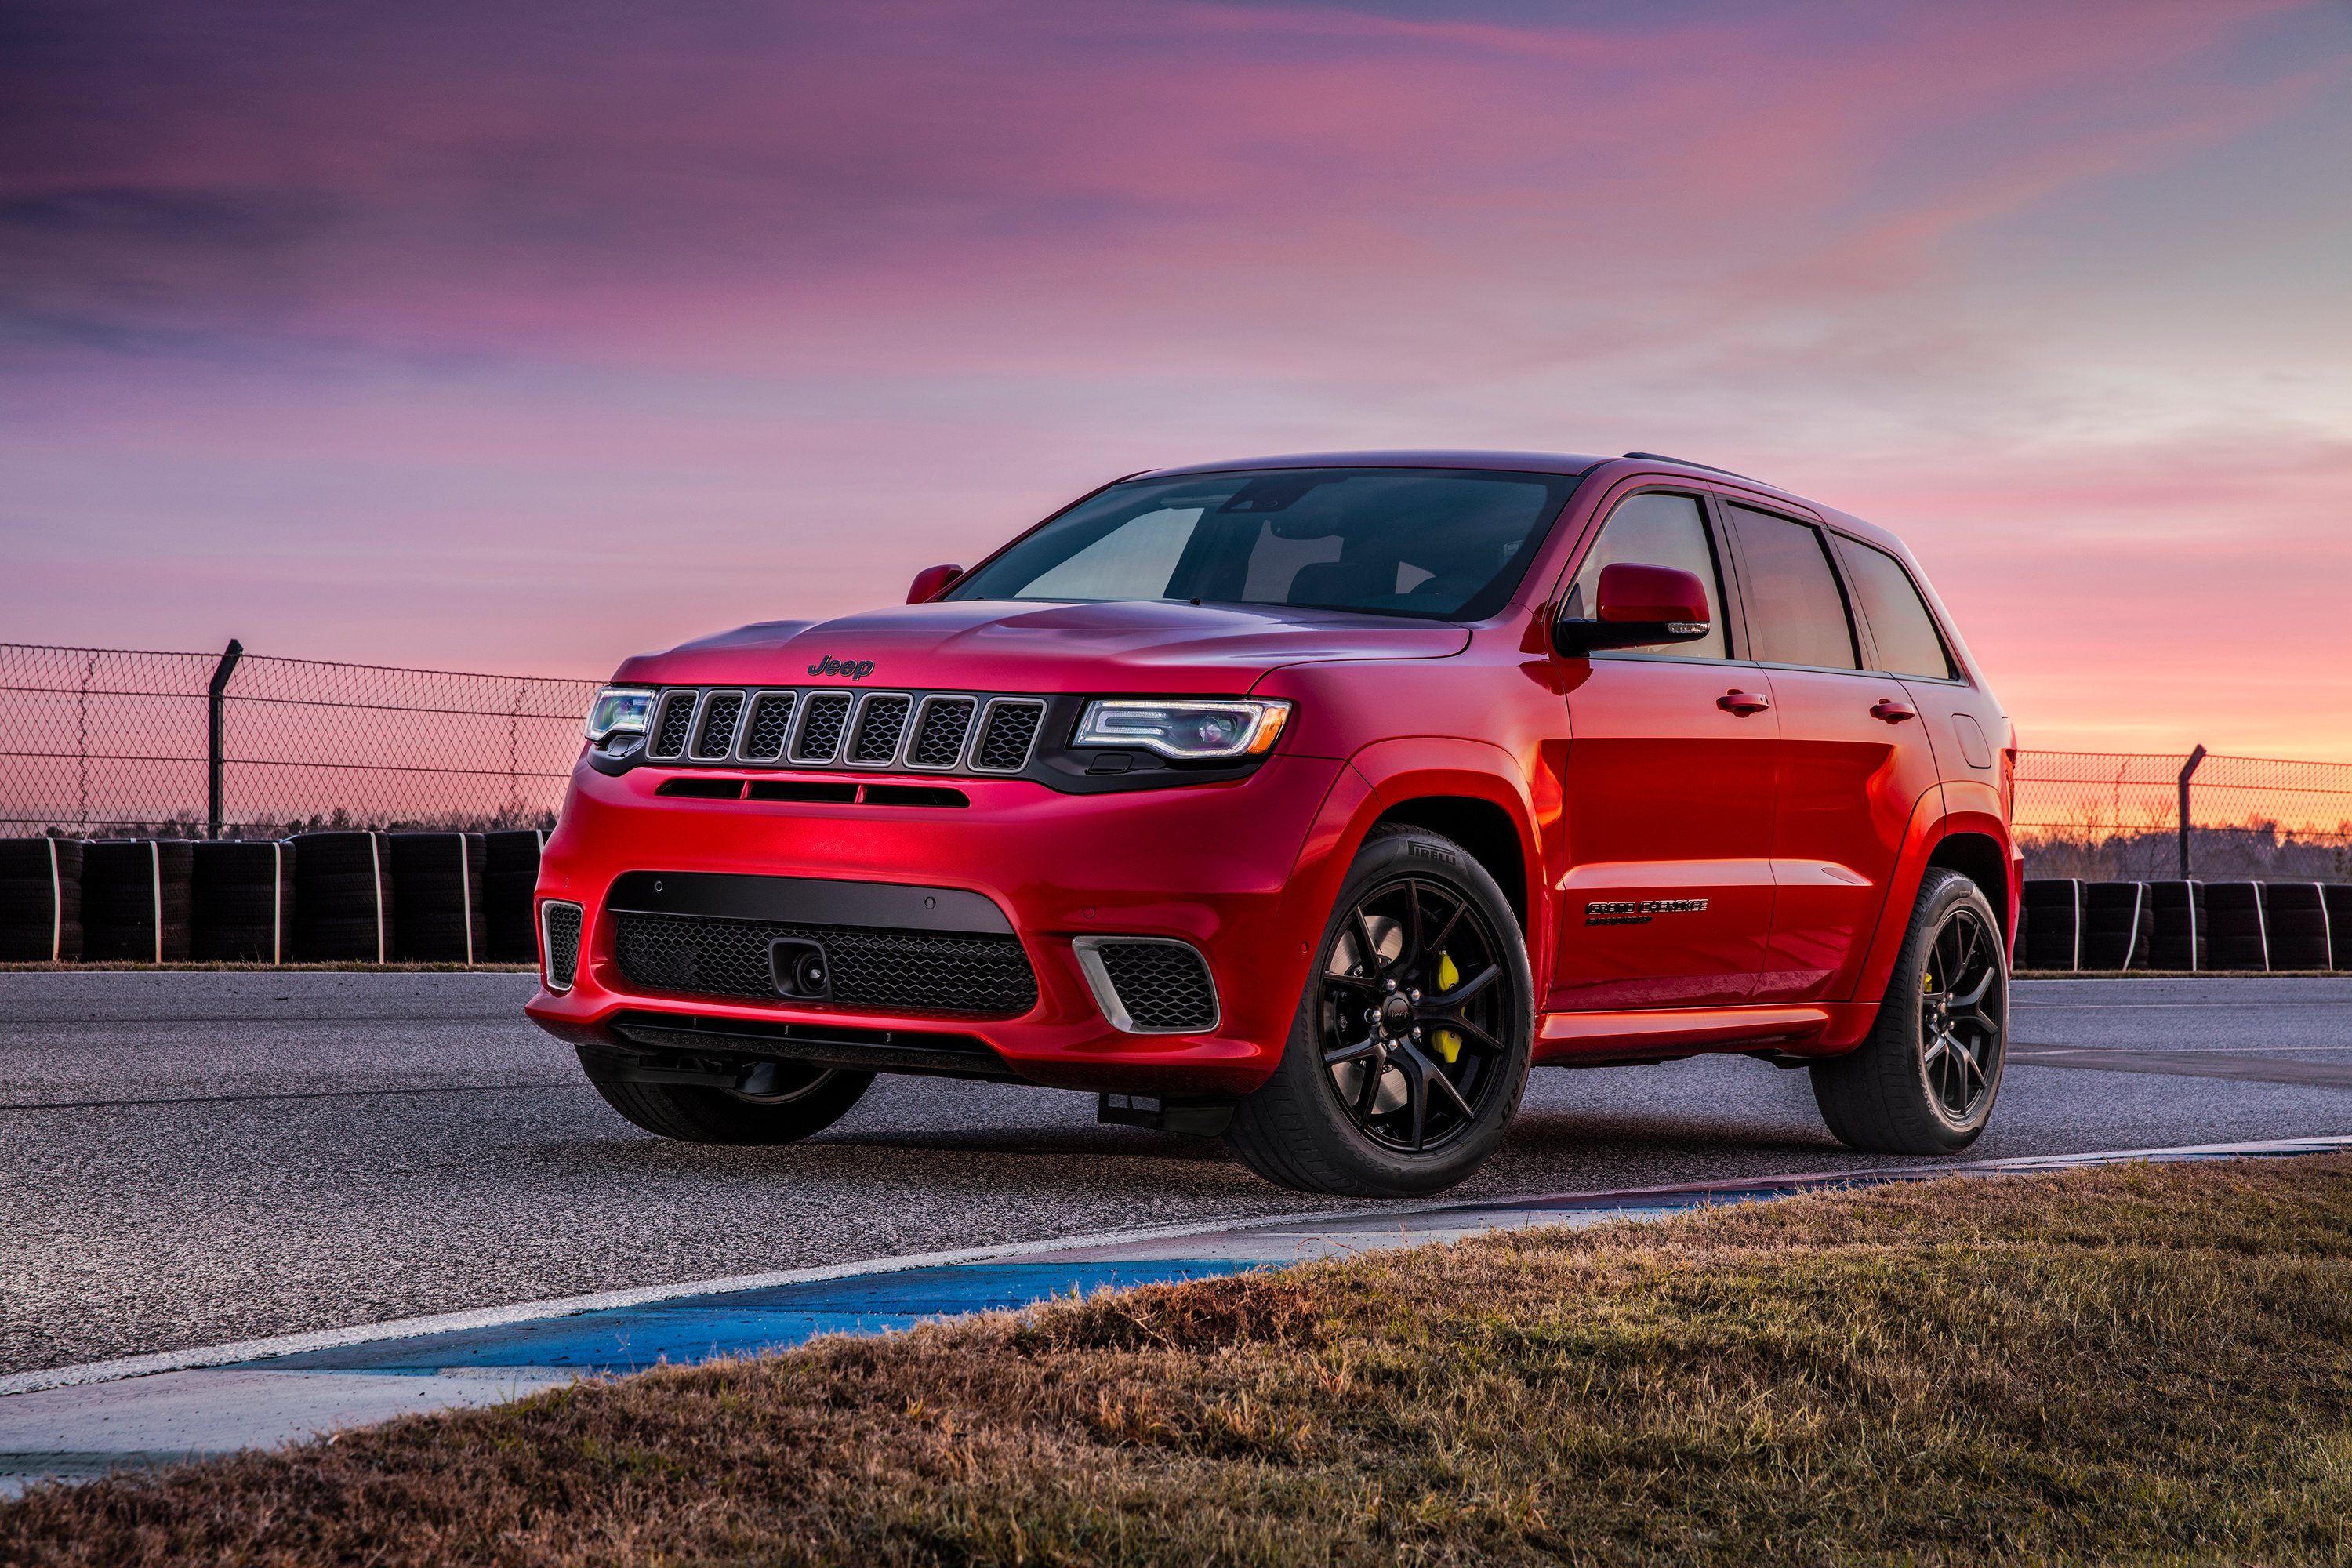 The 2018 Jeep Grand Cherokee Trackhawk is ready to go fast.